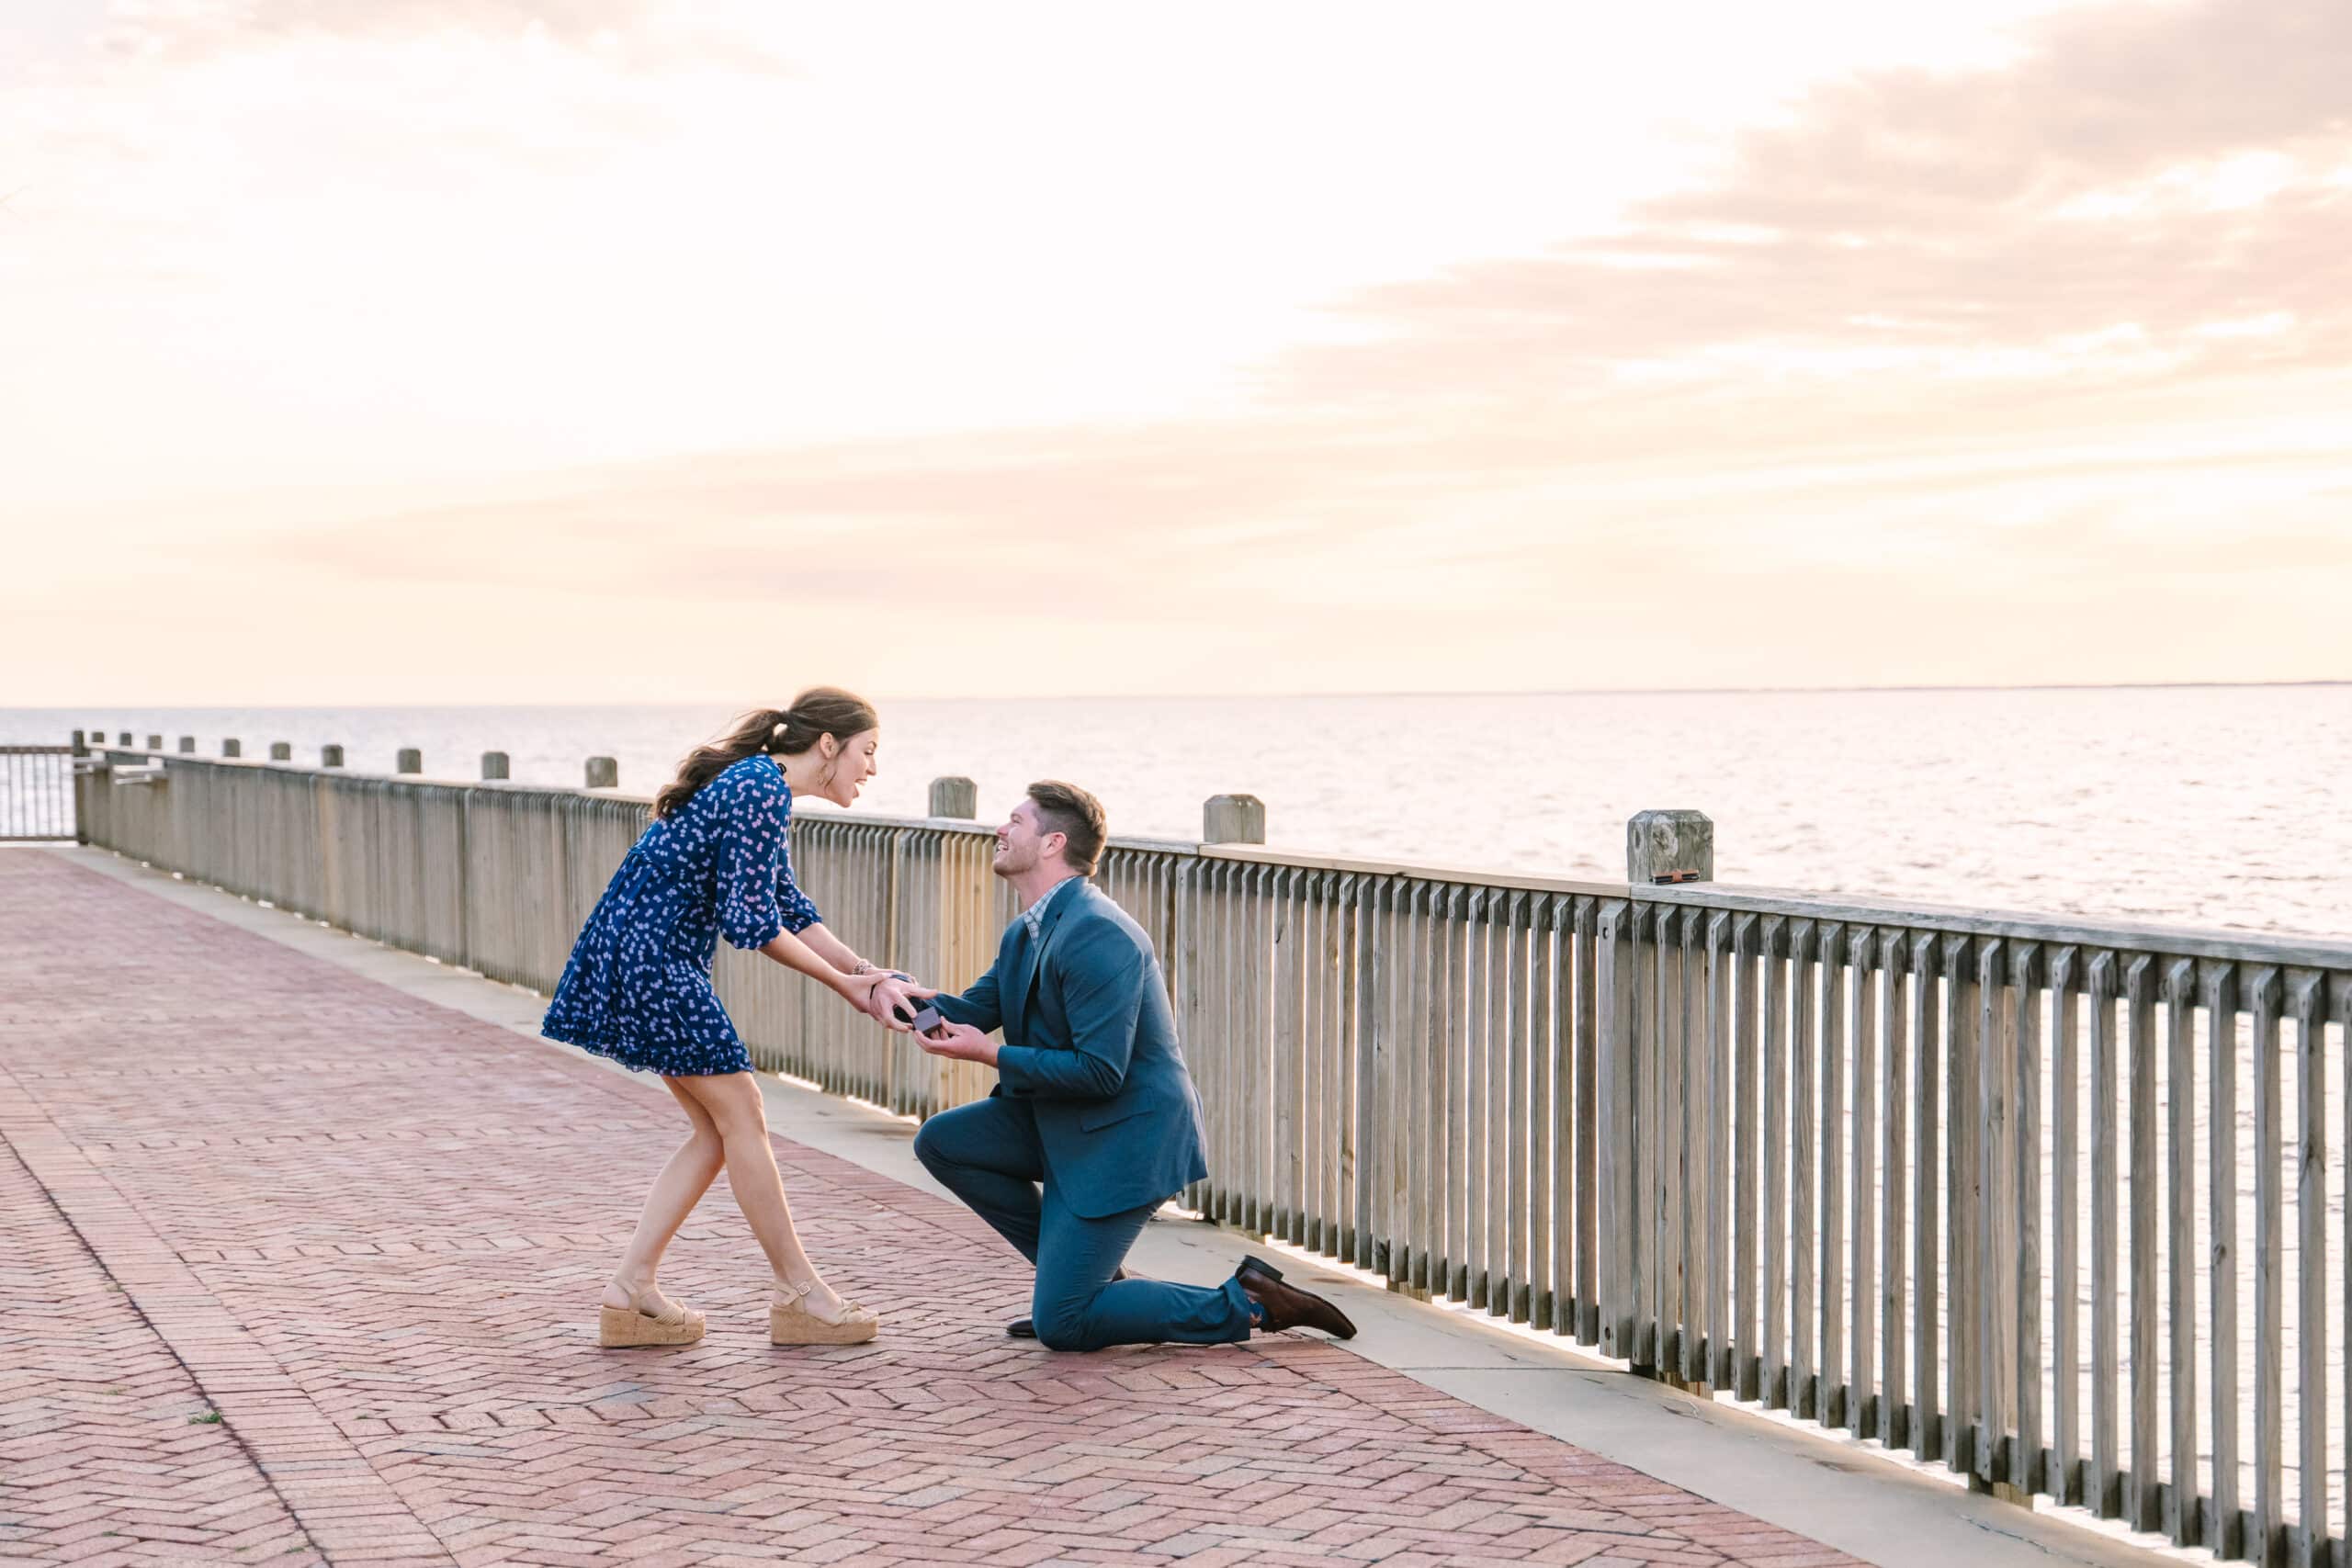 Man proposes at The Grand Hotel in Fairhope Alabama